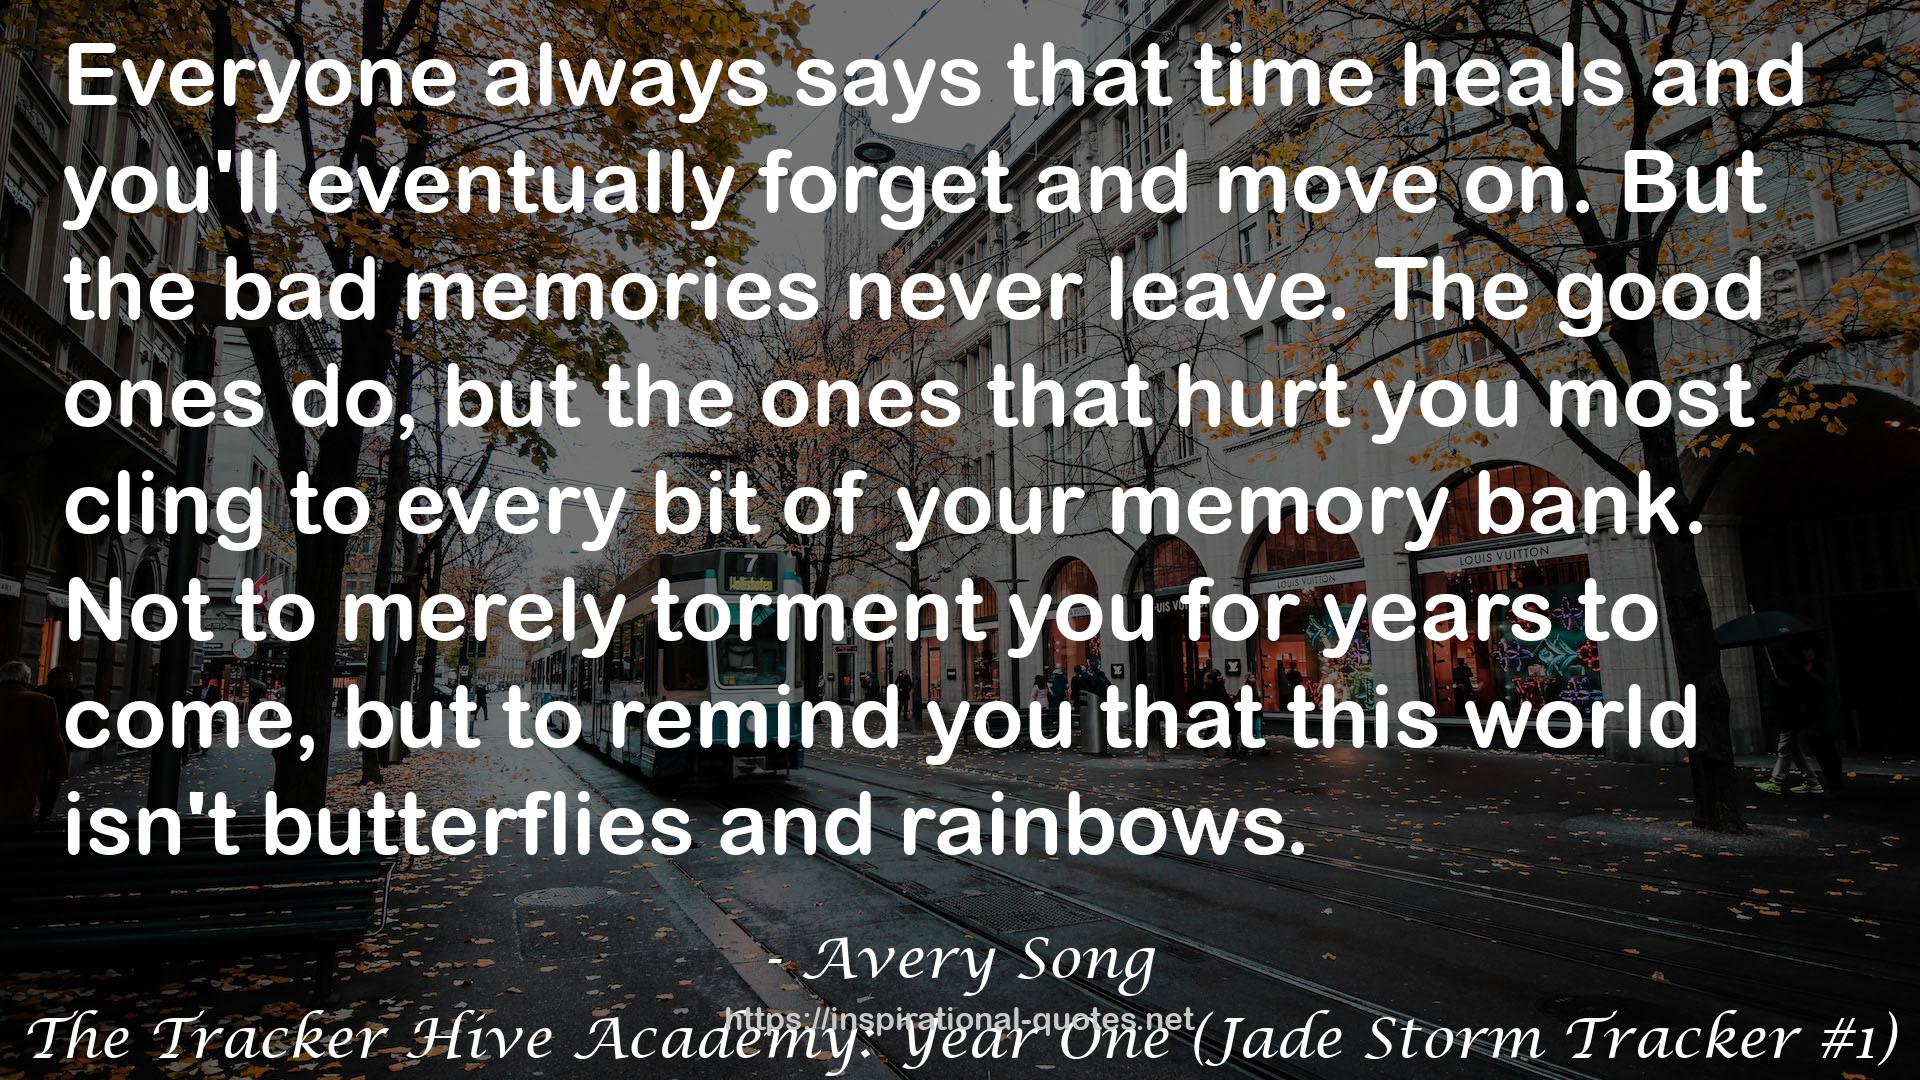 The Tracker Hive Academy: Year One (Jade Storm Tracker #1) QUOTES